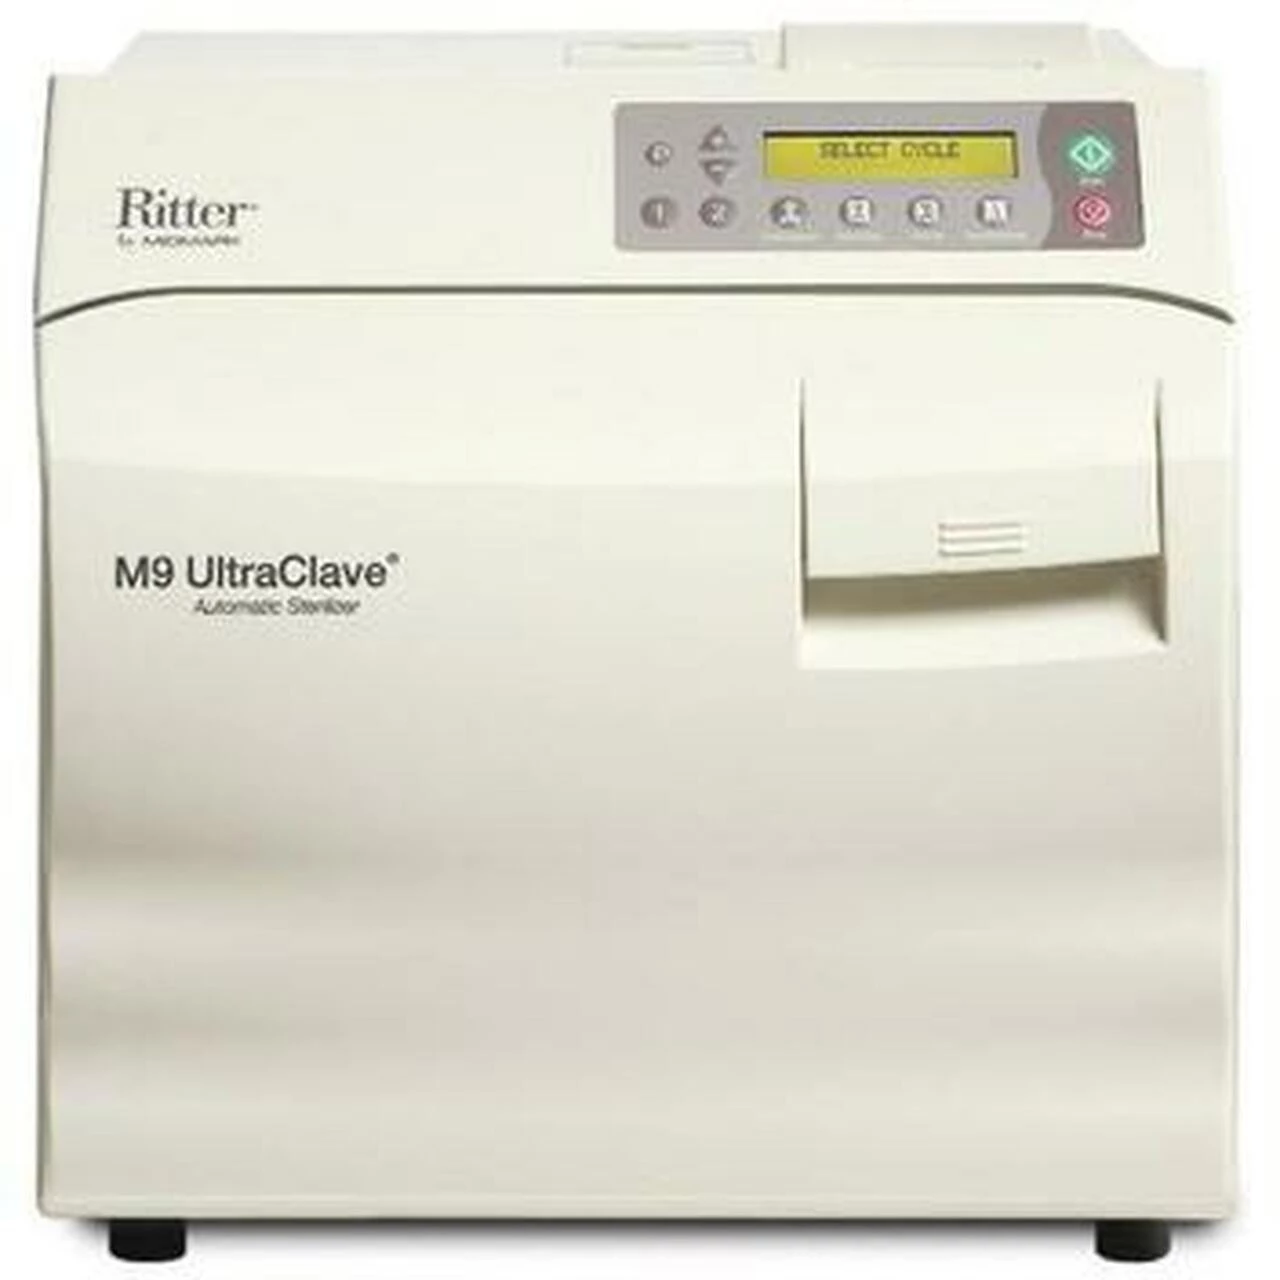 Midmark Ritter M9 UltraClave Autoclave